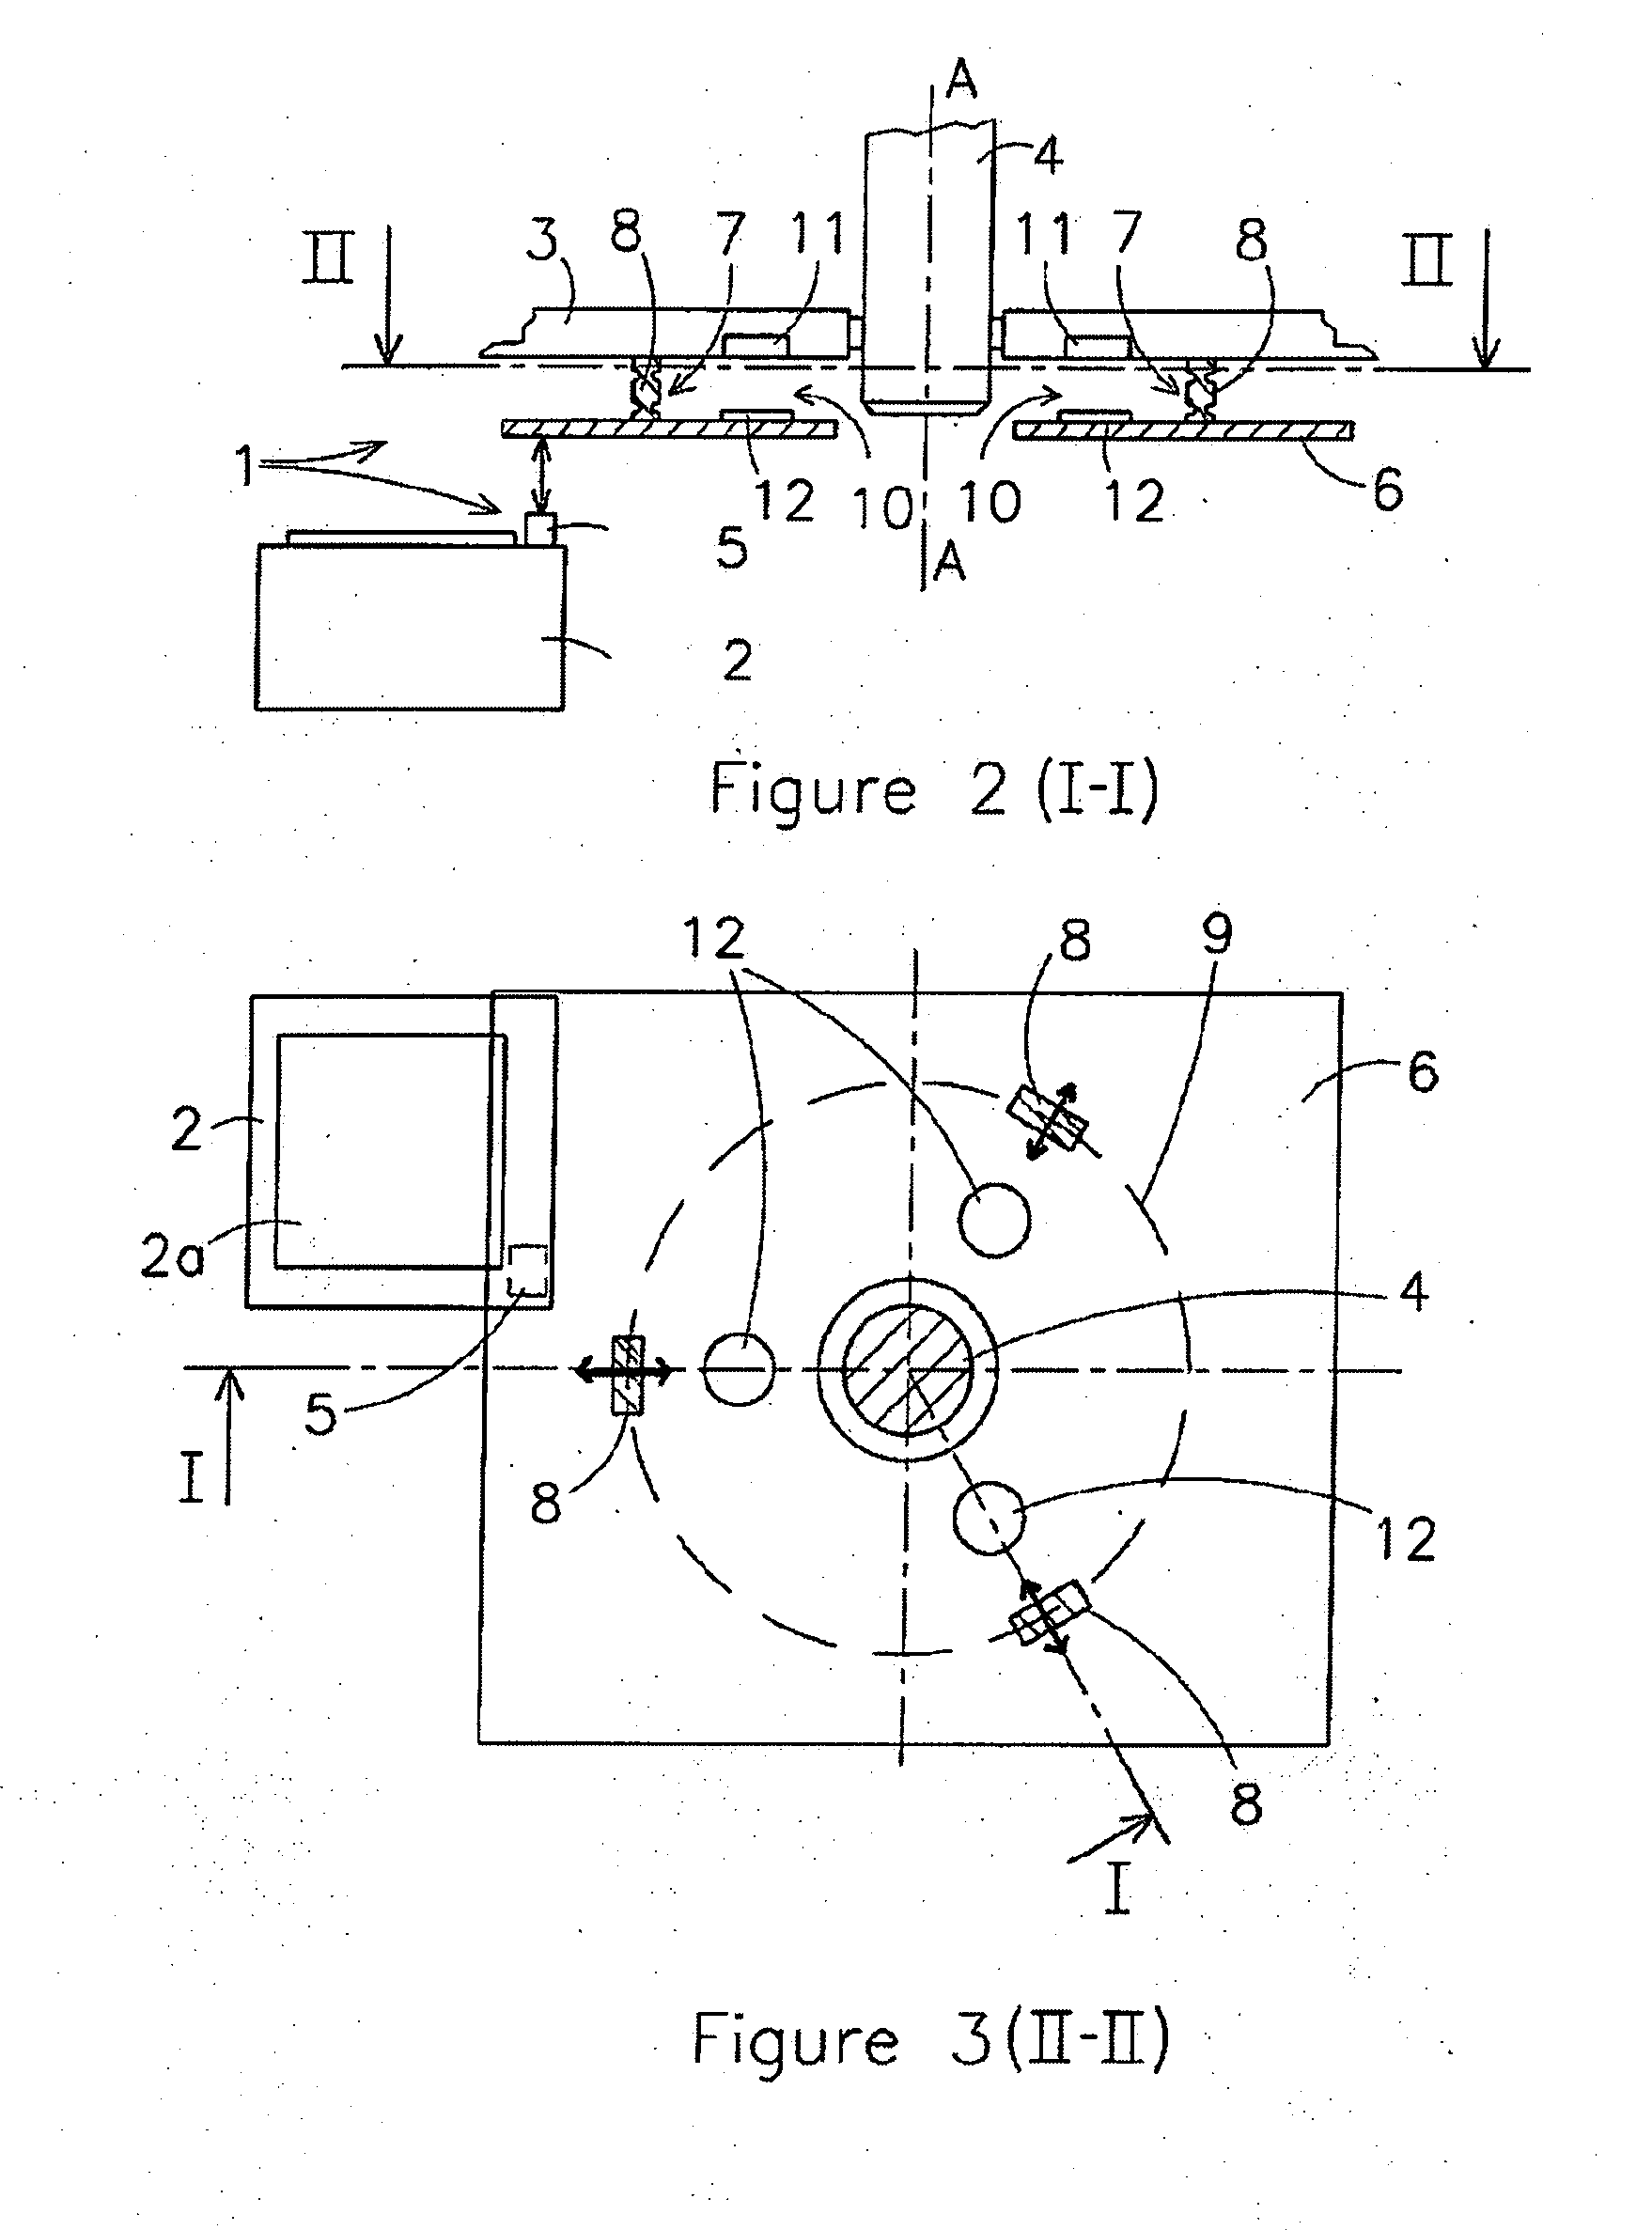 Measurement system, lithographic apparatus and method for measuring a position dependent signal of a movable object